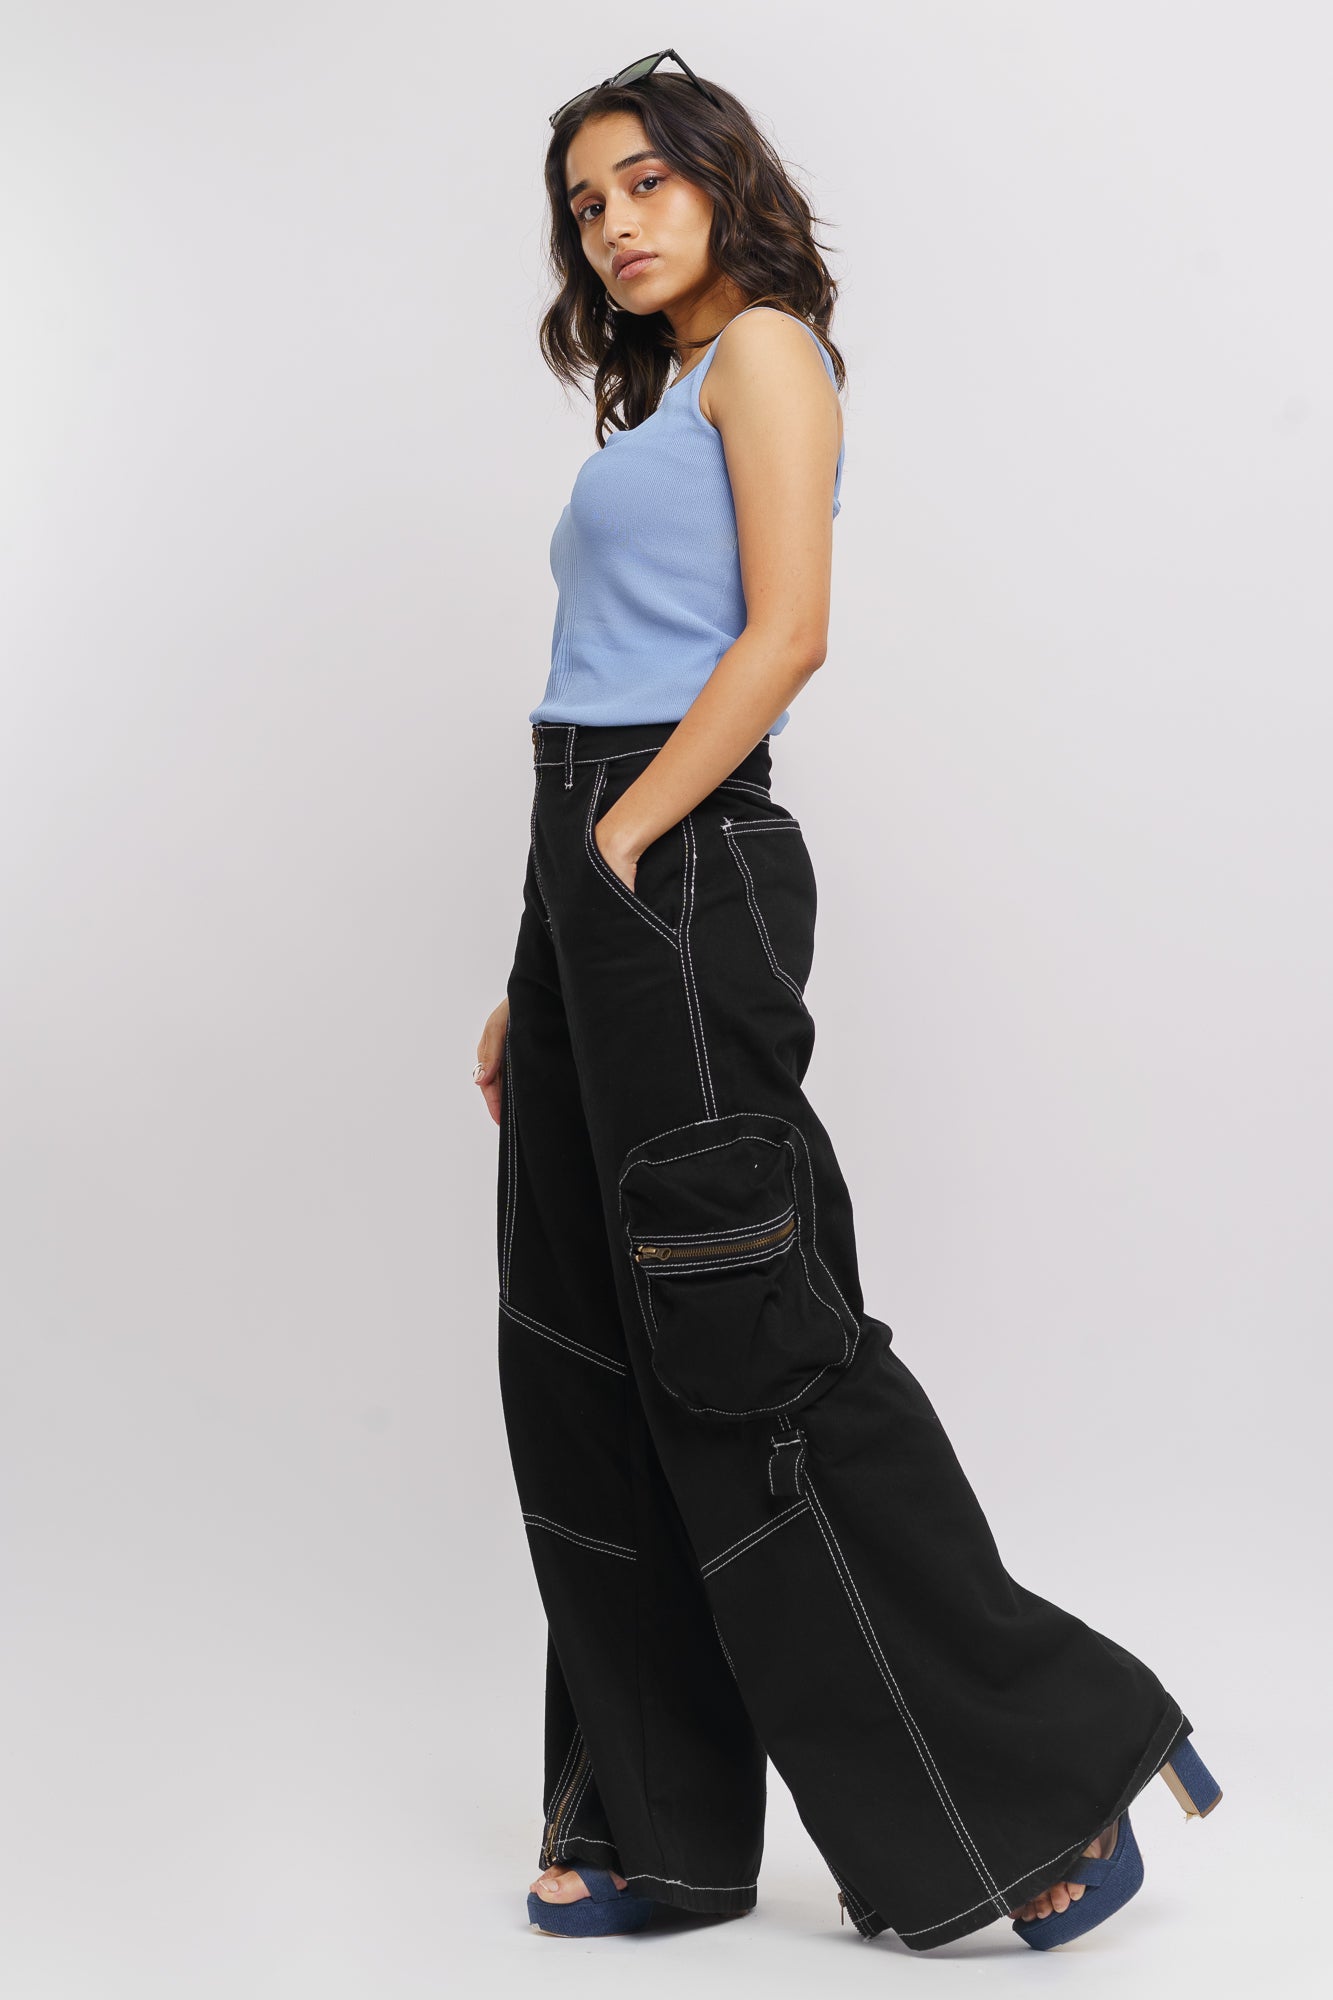 Plain Colors Lamlam Skirt Dungaree For Ladies And Girls Wear at Rs  275/piece in Delhi